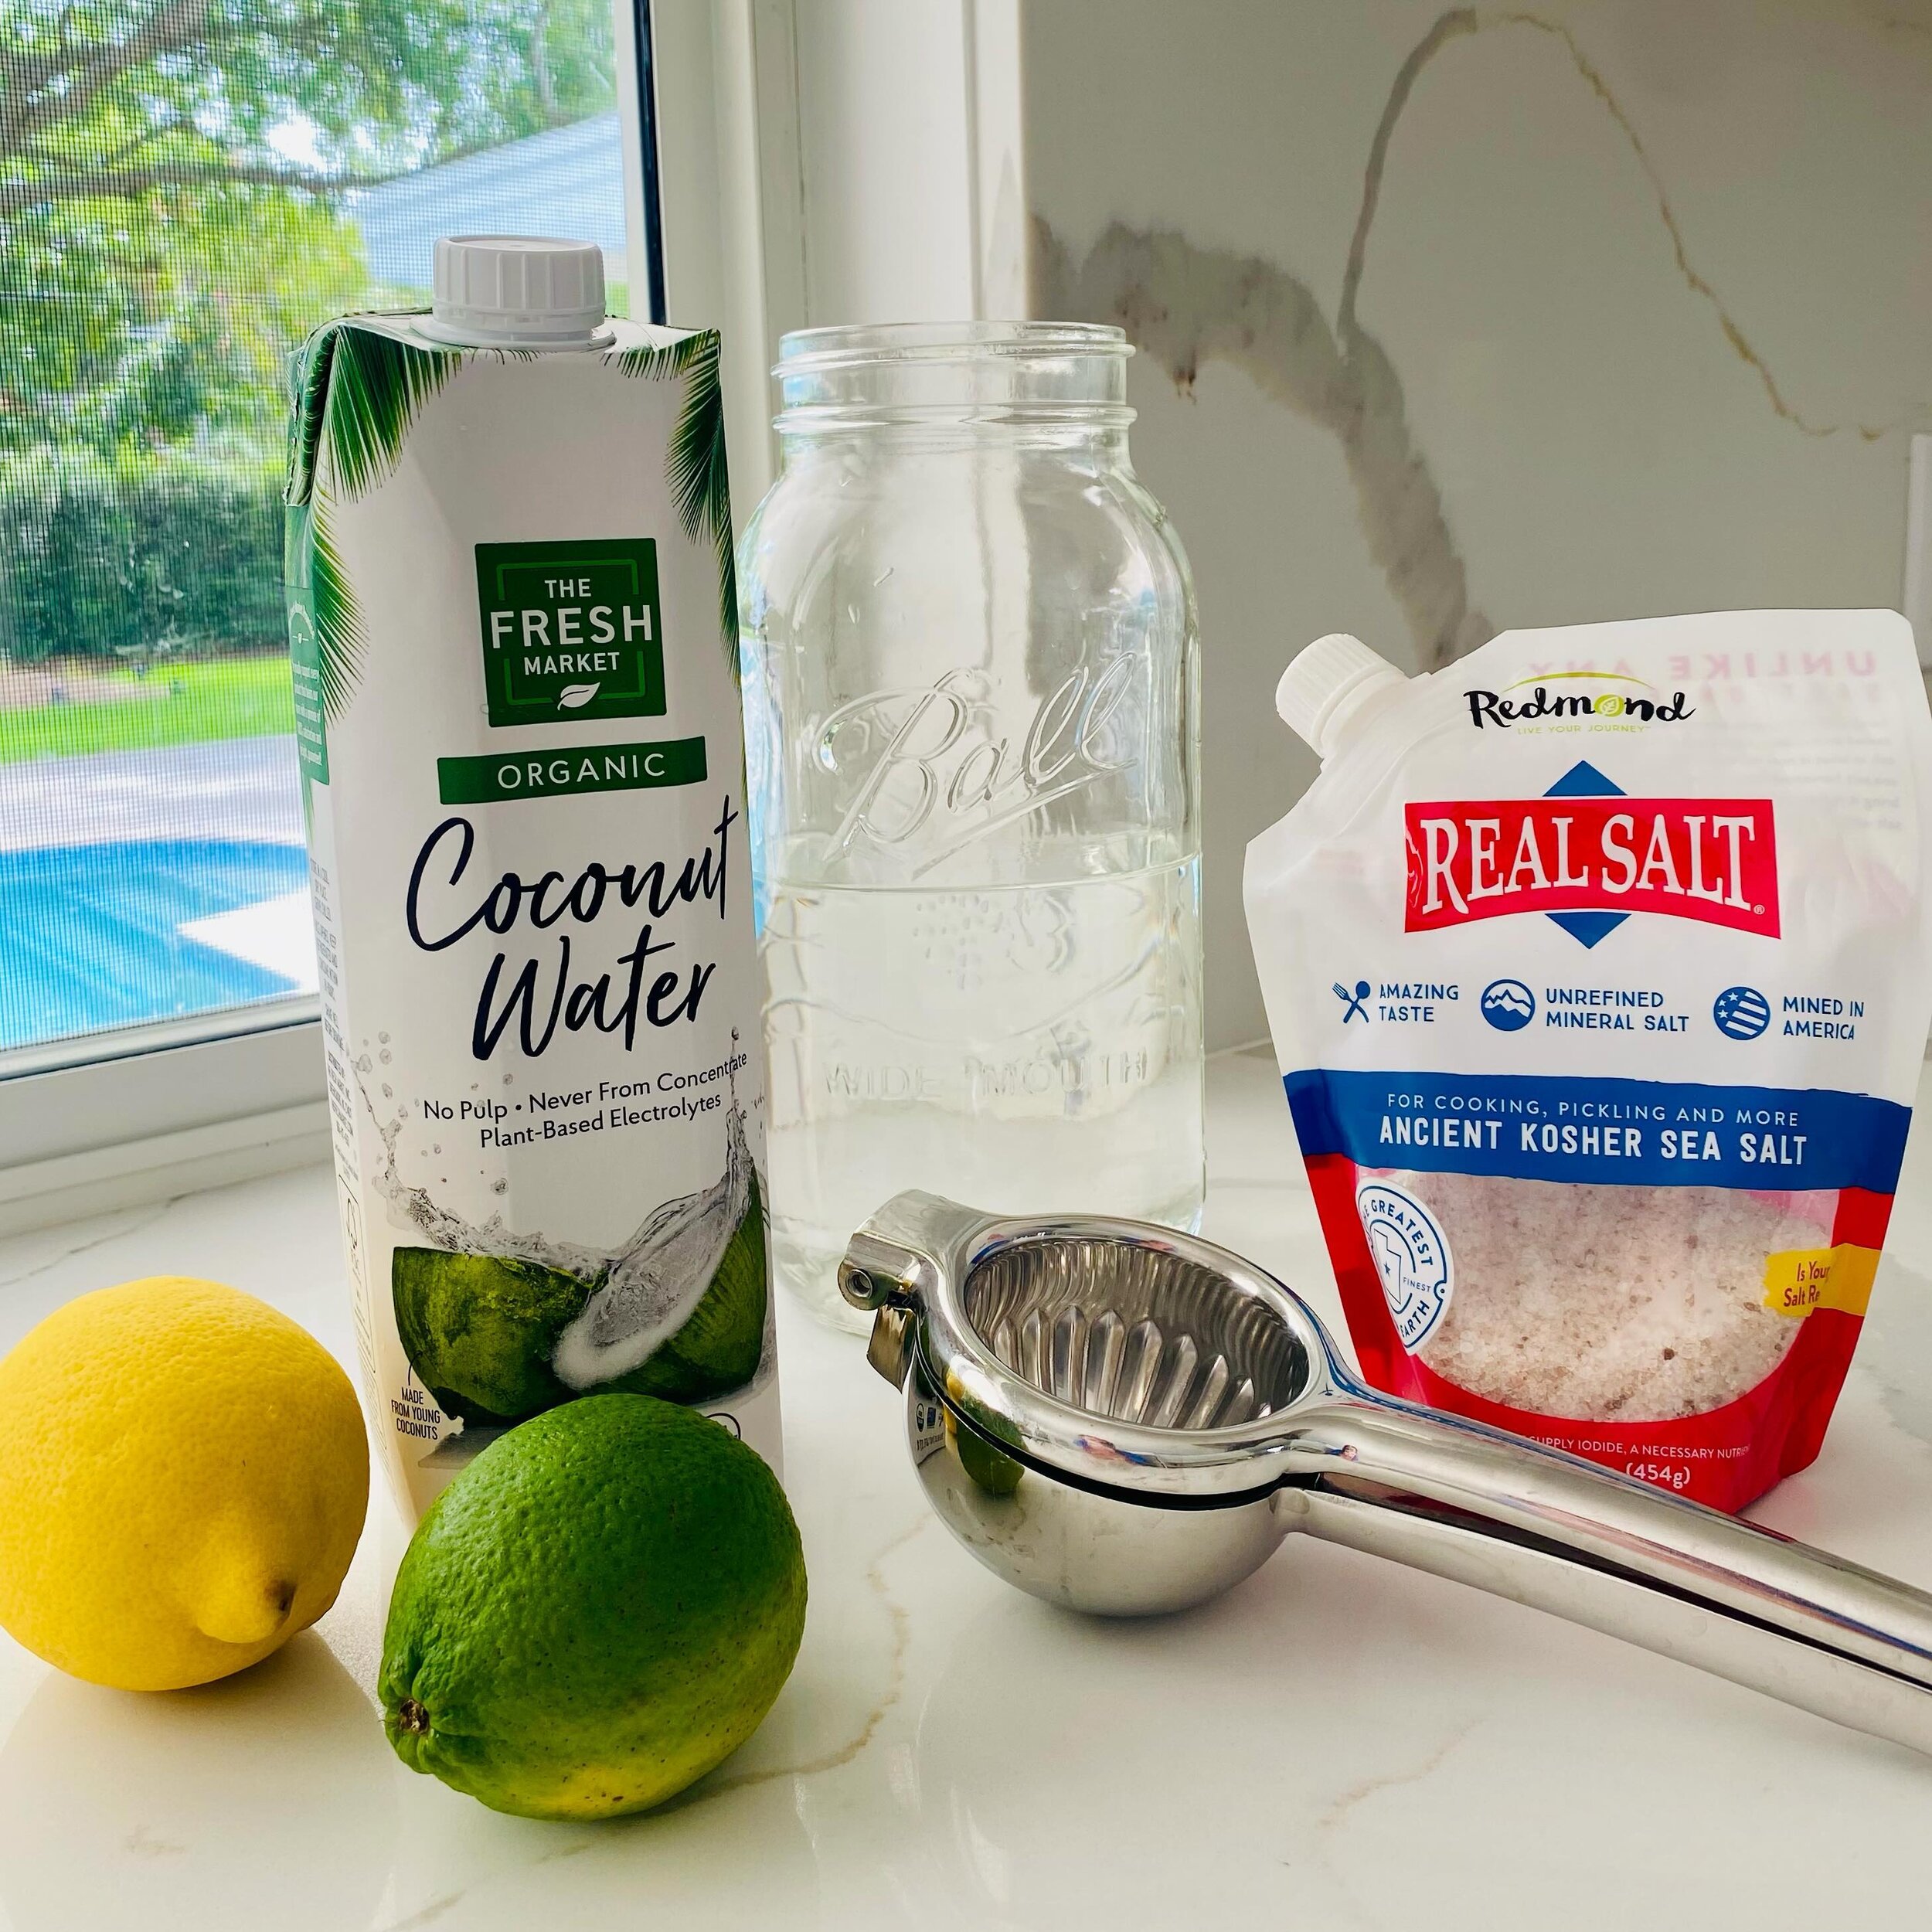 a better for you #electrolyte drink you&rsquo;ll love 🍋💦

1/2 organic coconut water
1/2 filtered water
1/2-1 whole squeezed lemon 
1/2-1 whole squeezed lime
a pinch to 1 tsp mineral salt of choice @redmondrealsalt 

*adjust according to your cup/co